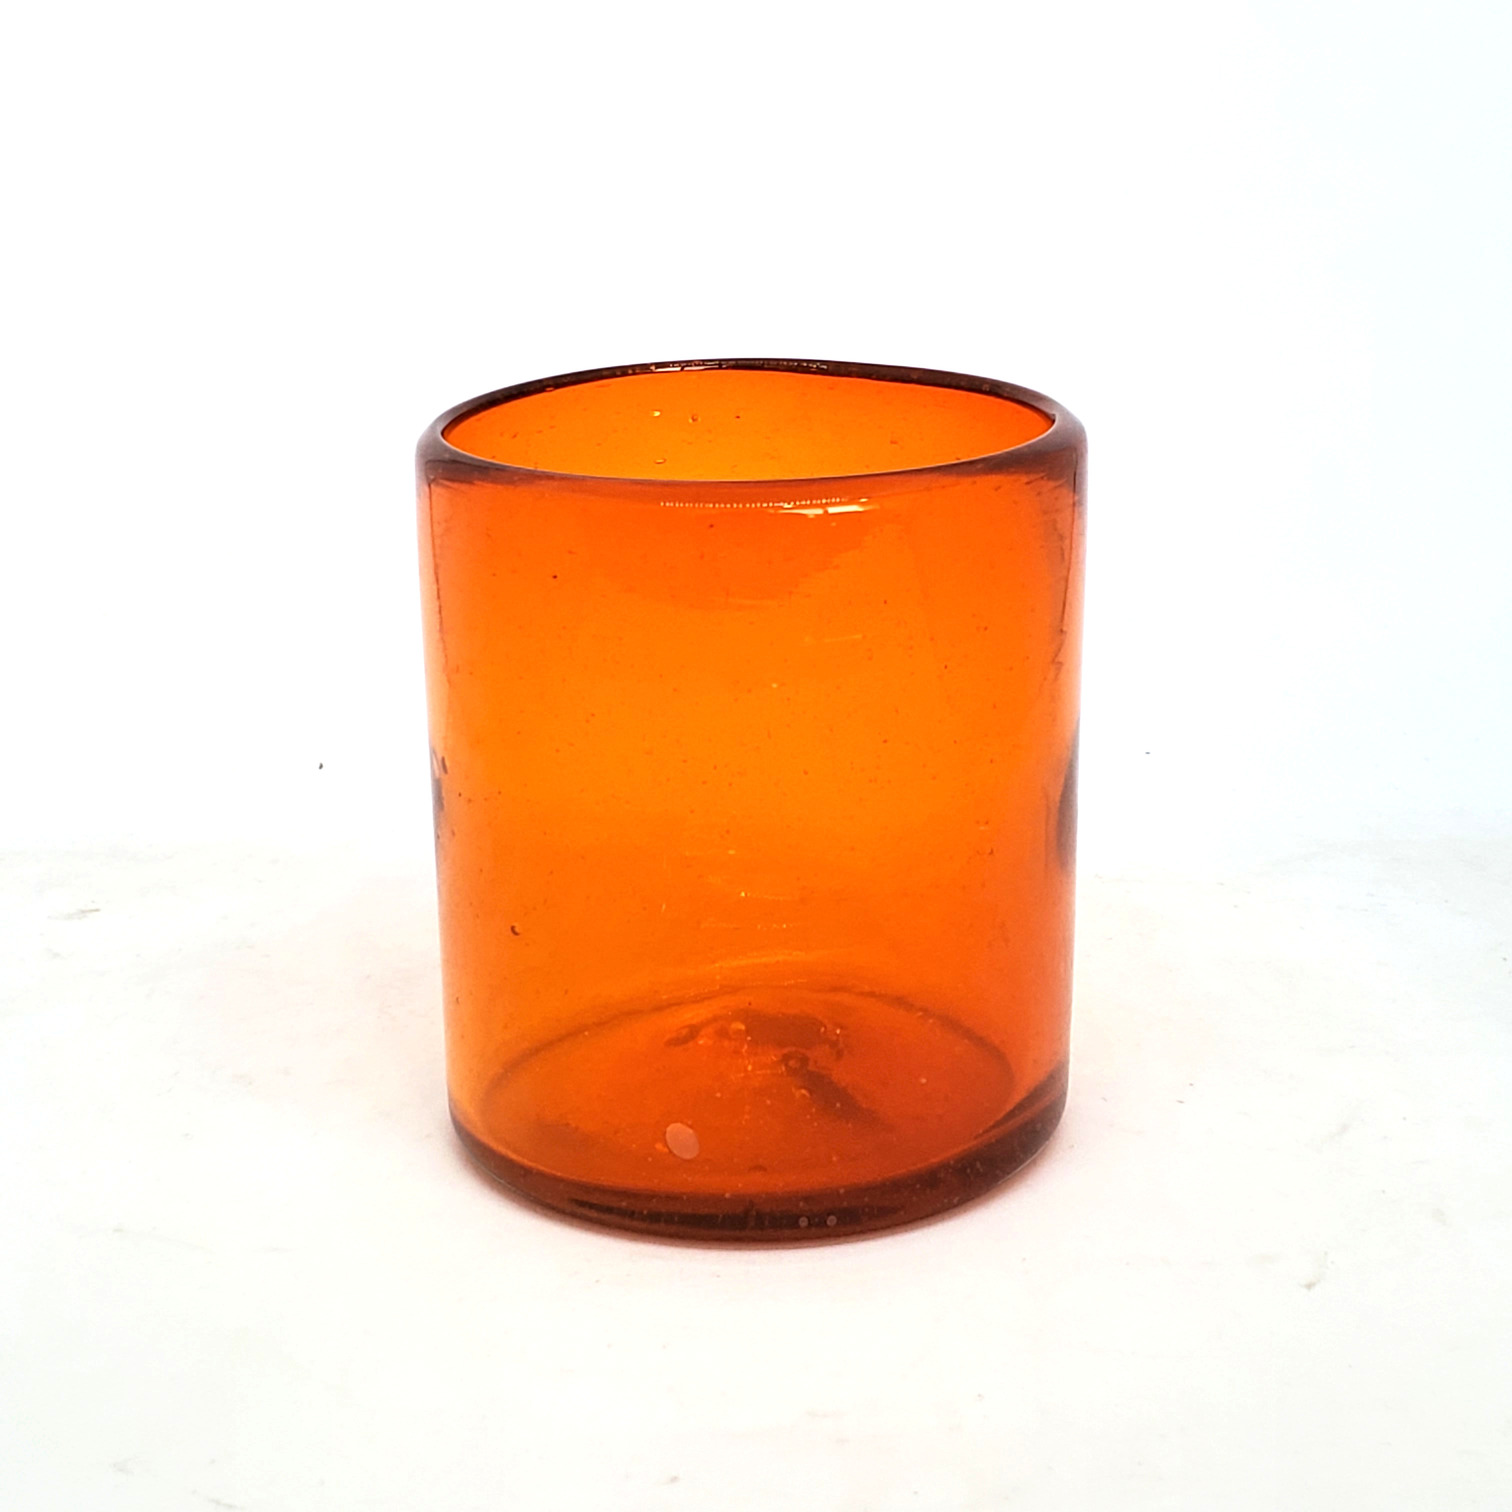 Wholesale MEXICAN GLASSWARE / Solid Orange 9 oz Short Tumblers  / Enhance your favorite drink with these colorful handcrafted glasses.